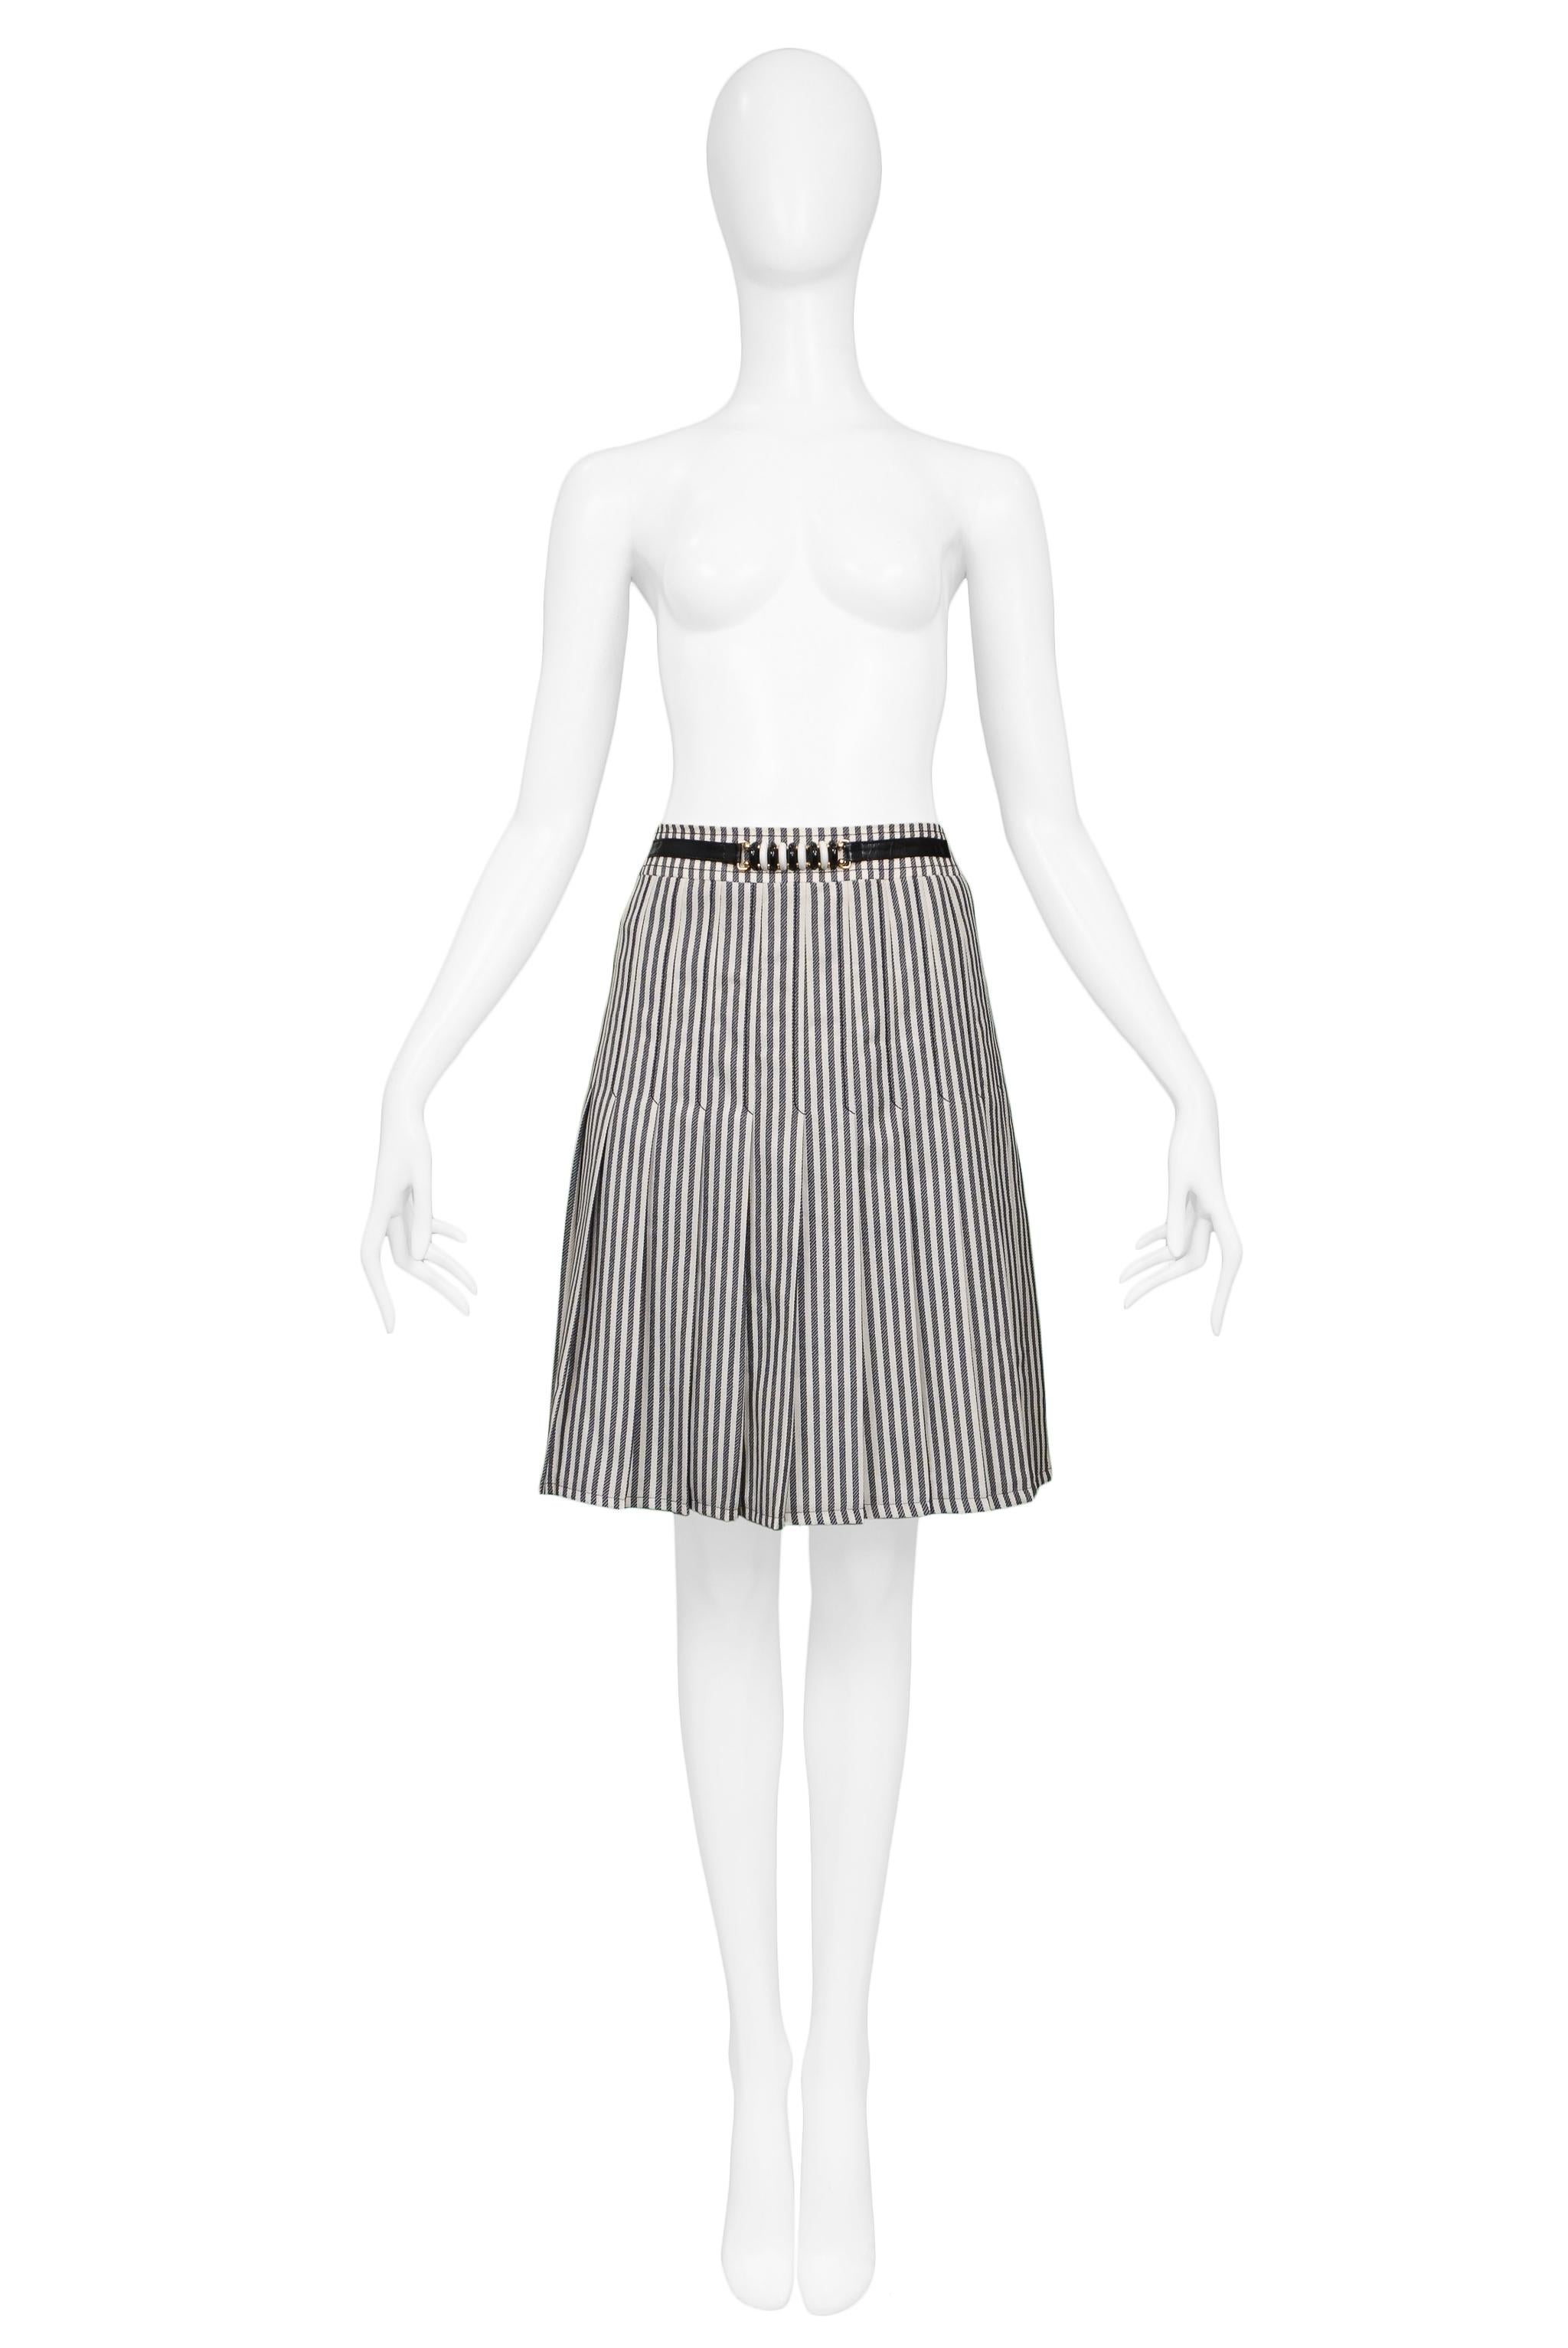 Resurrection Vintage is excited to offer a vintage black and white wool Celine box pleat skirt with leather and hardware belt detail at waist. 

Celine, Paris
Size 42
Measurements: Waist 28